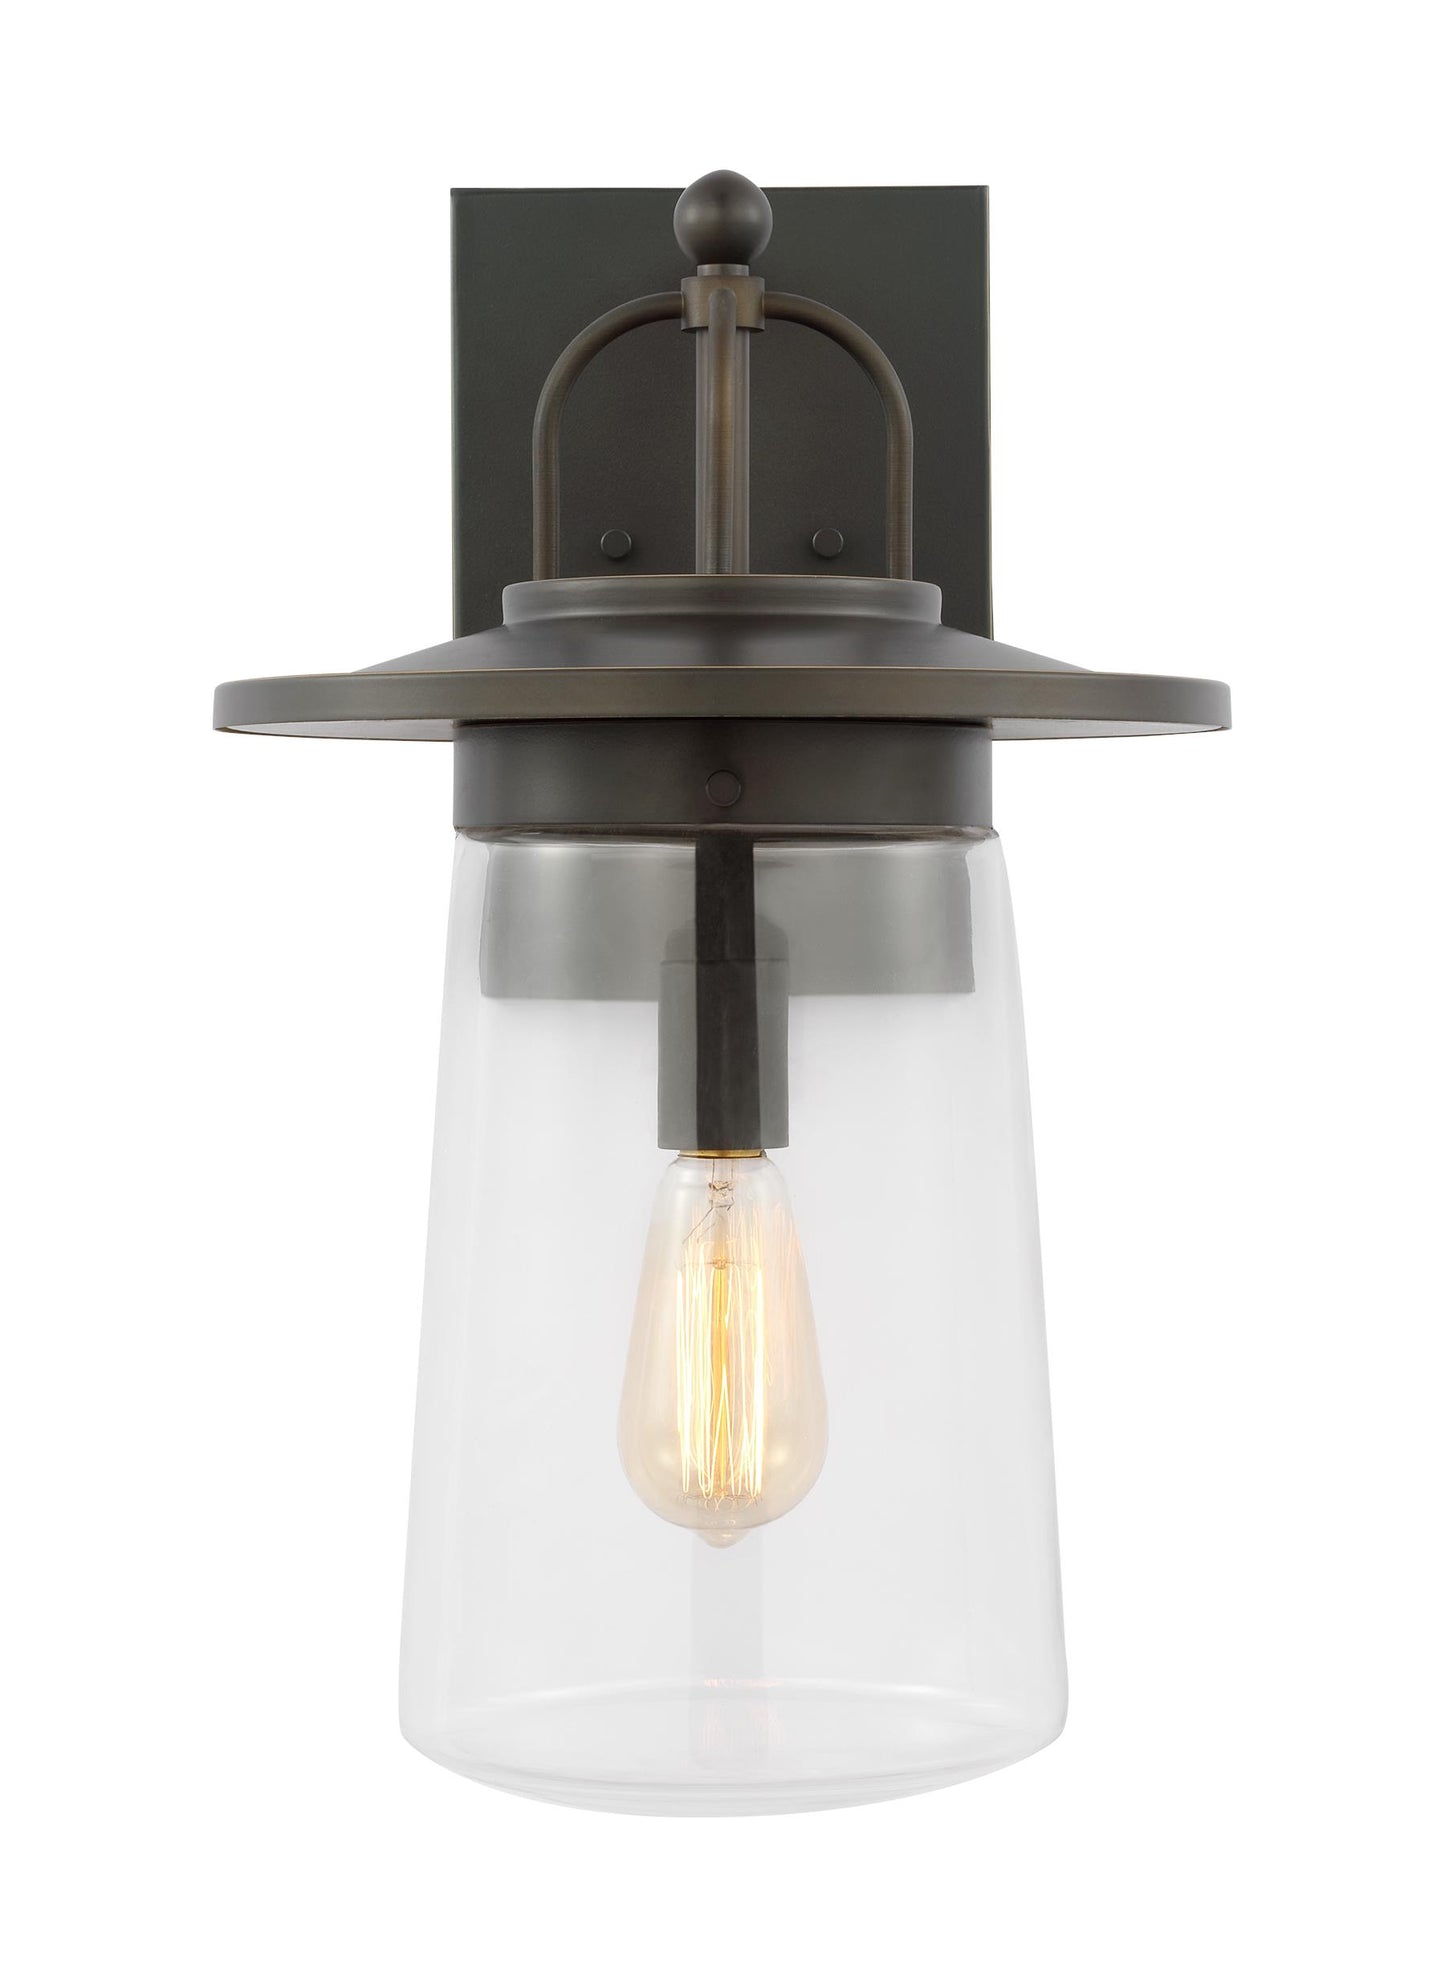 Tybee traditional 1-light outdoor exterior large wall lantern in antique bronze finish with clear glass shade